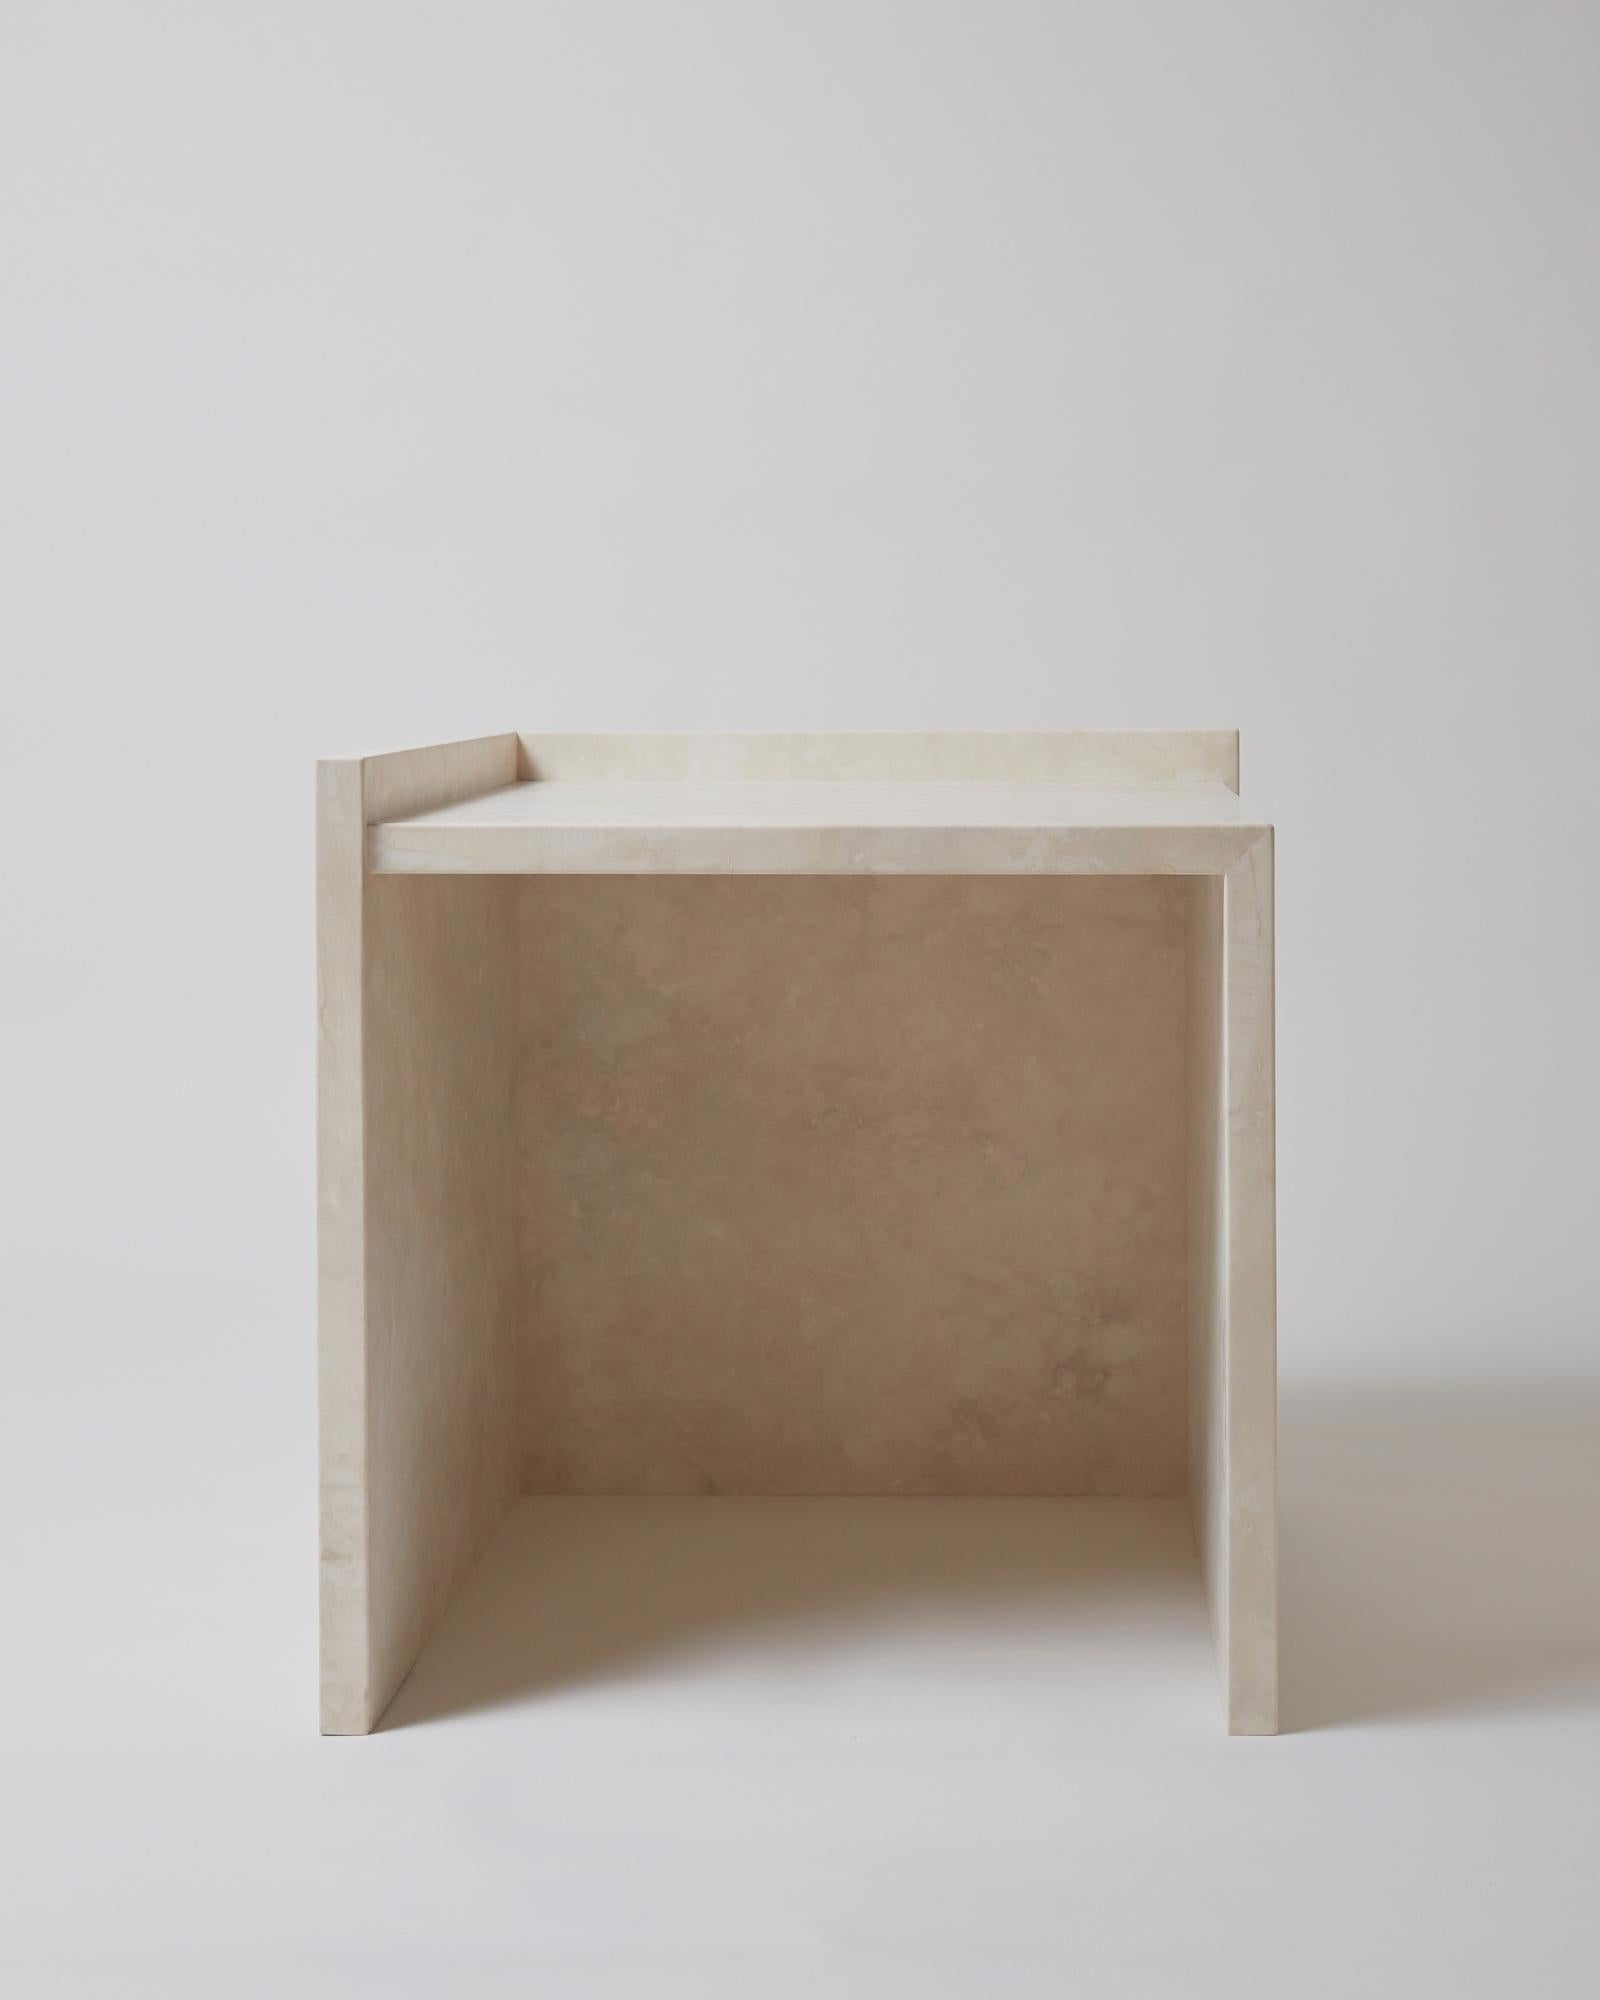 The AA112.1 side table, part of the 'Pure Minimalist' collection by Amee Allsop, is a simple yet architectural design with a focus on the material and form. It is elegantly constructed of 3cm solid ivory travertine that is filled, honed and